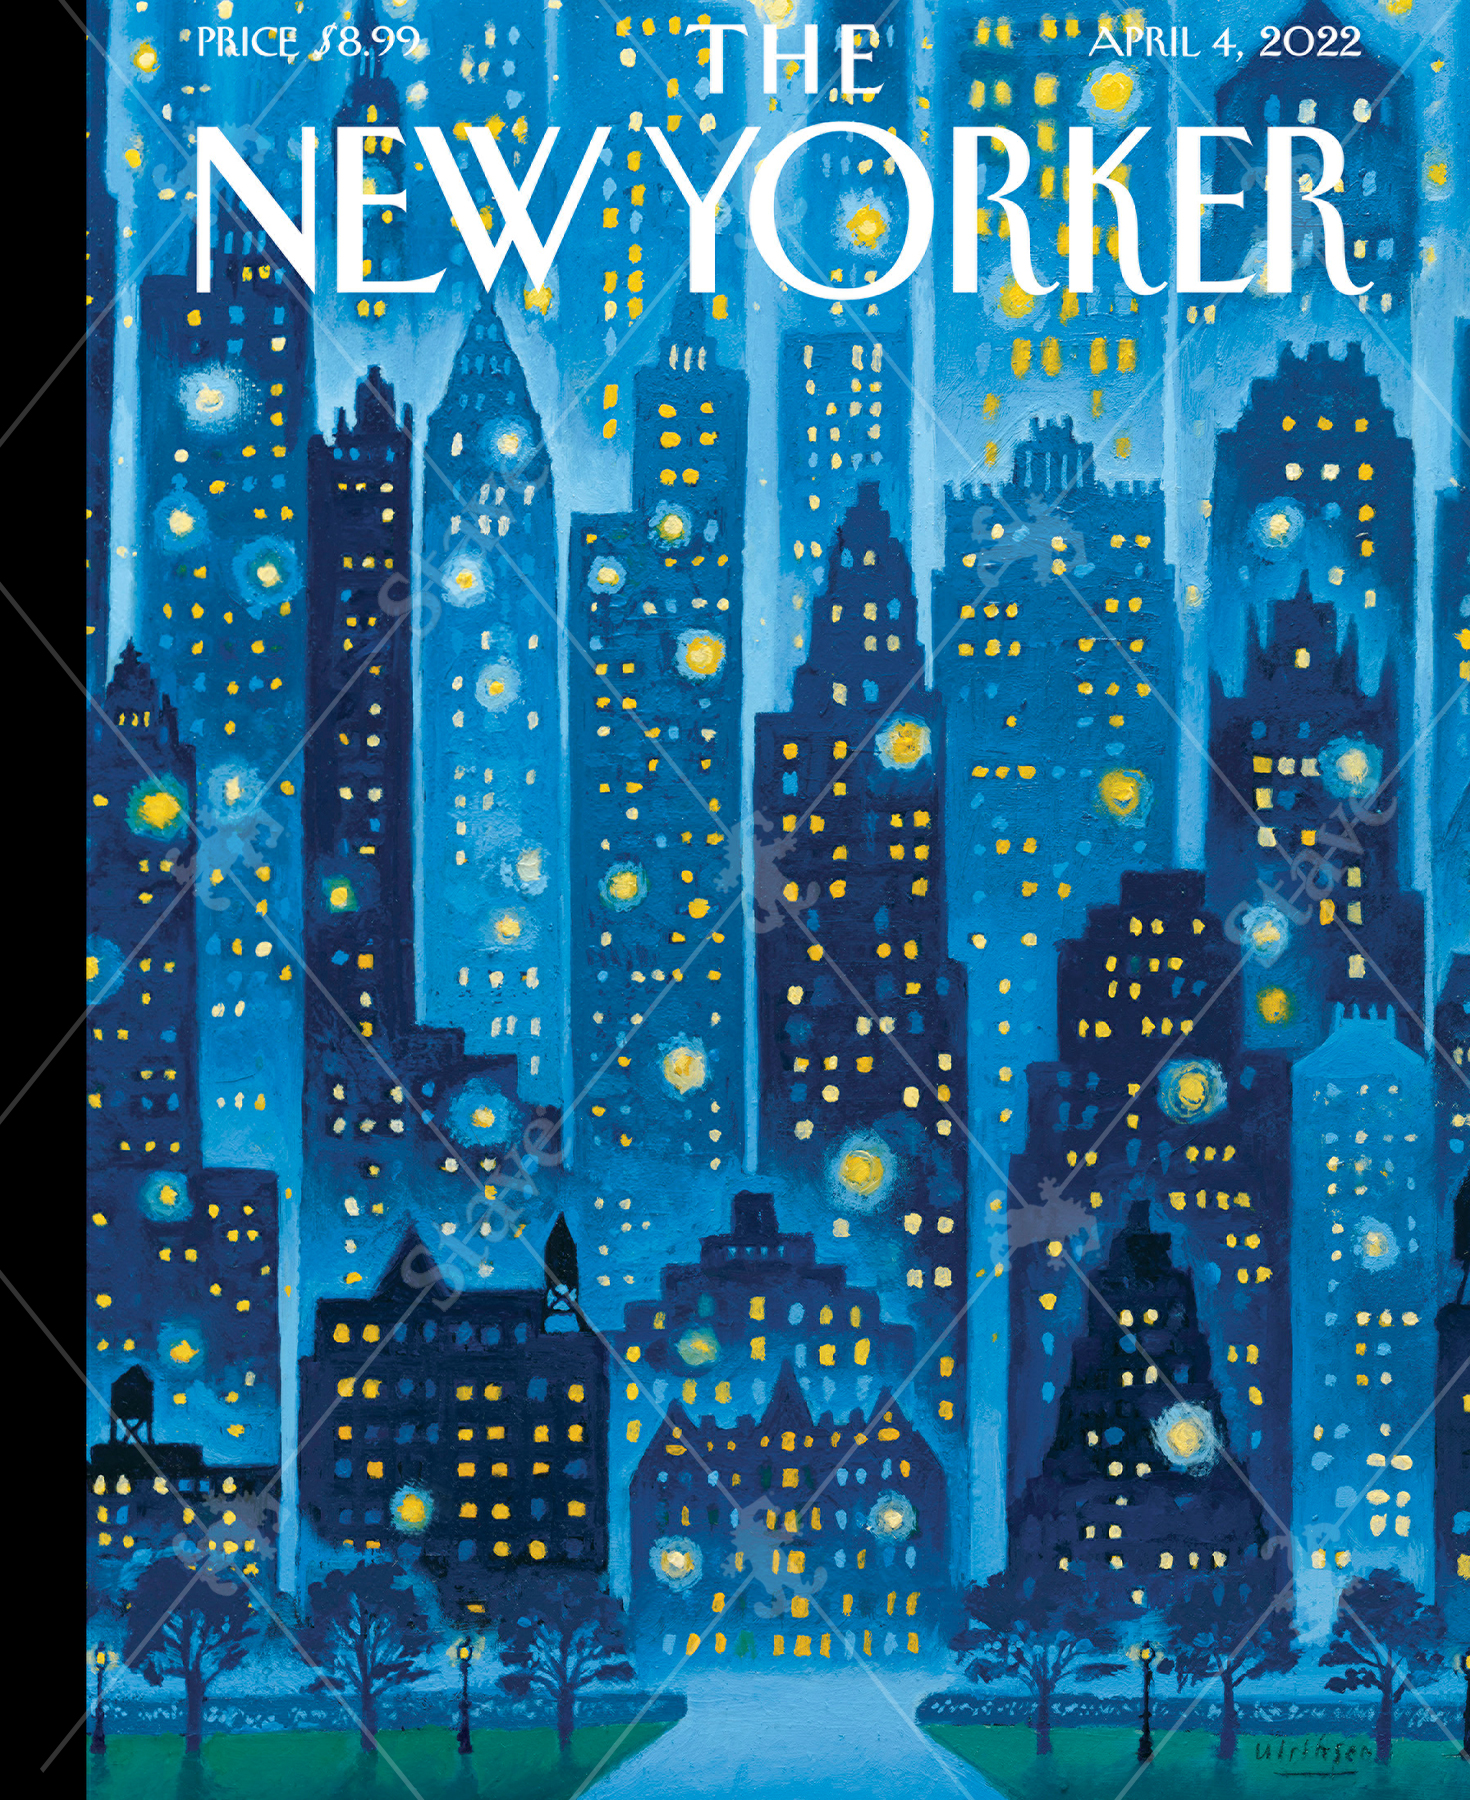 Close up of April 4, 2022 wooden jigsaw puzzle of a New Yorker cover of two people walking through the park at night with the city building lights looking like stars in the night sky.